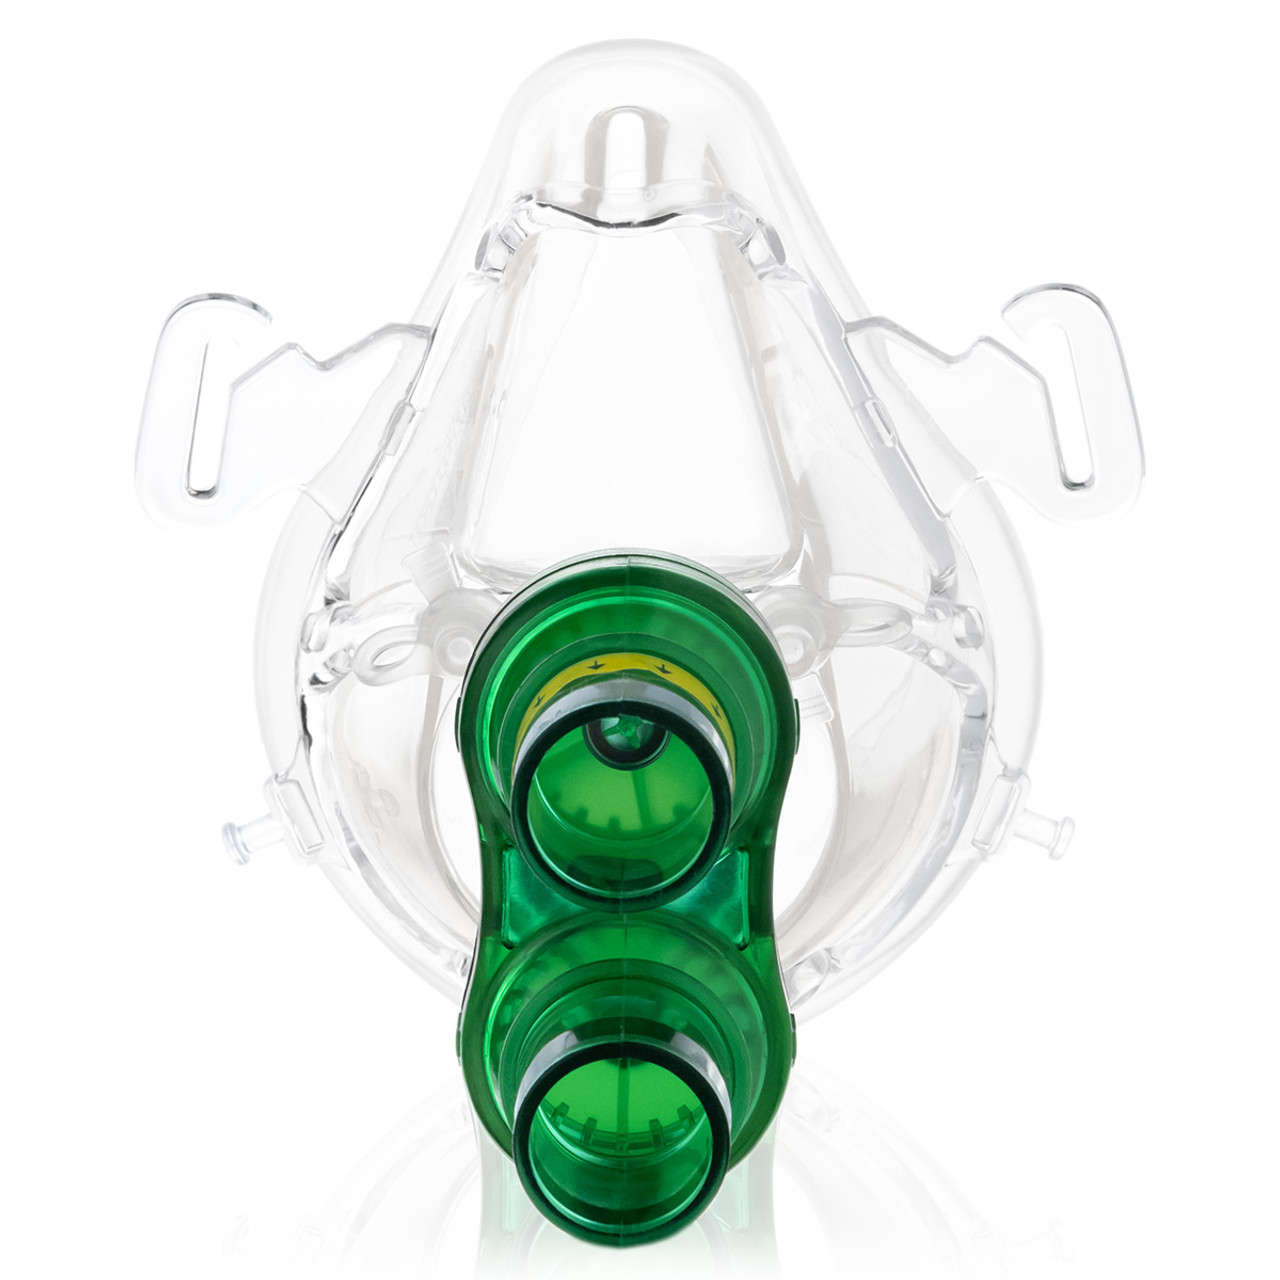 Full Comfort EWOT Mask with Non-Rebreather Valve